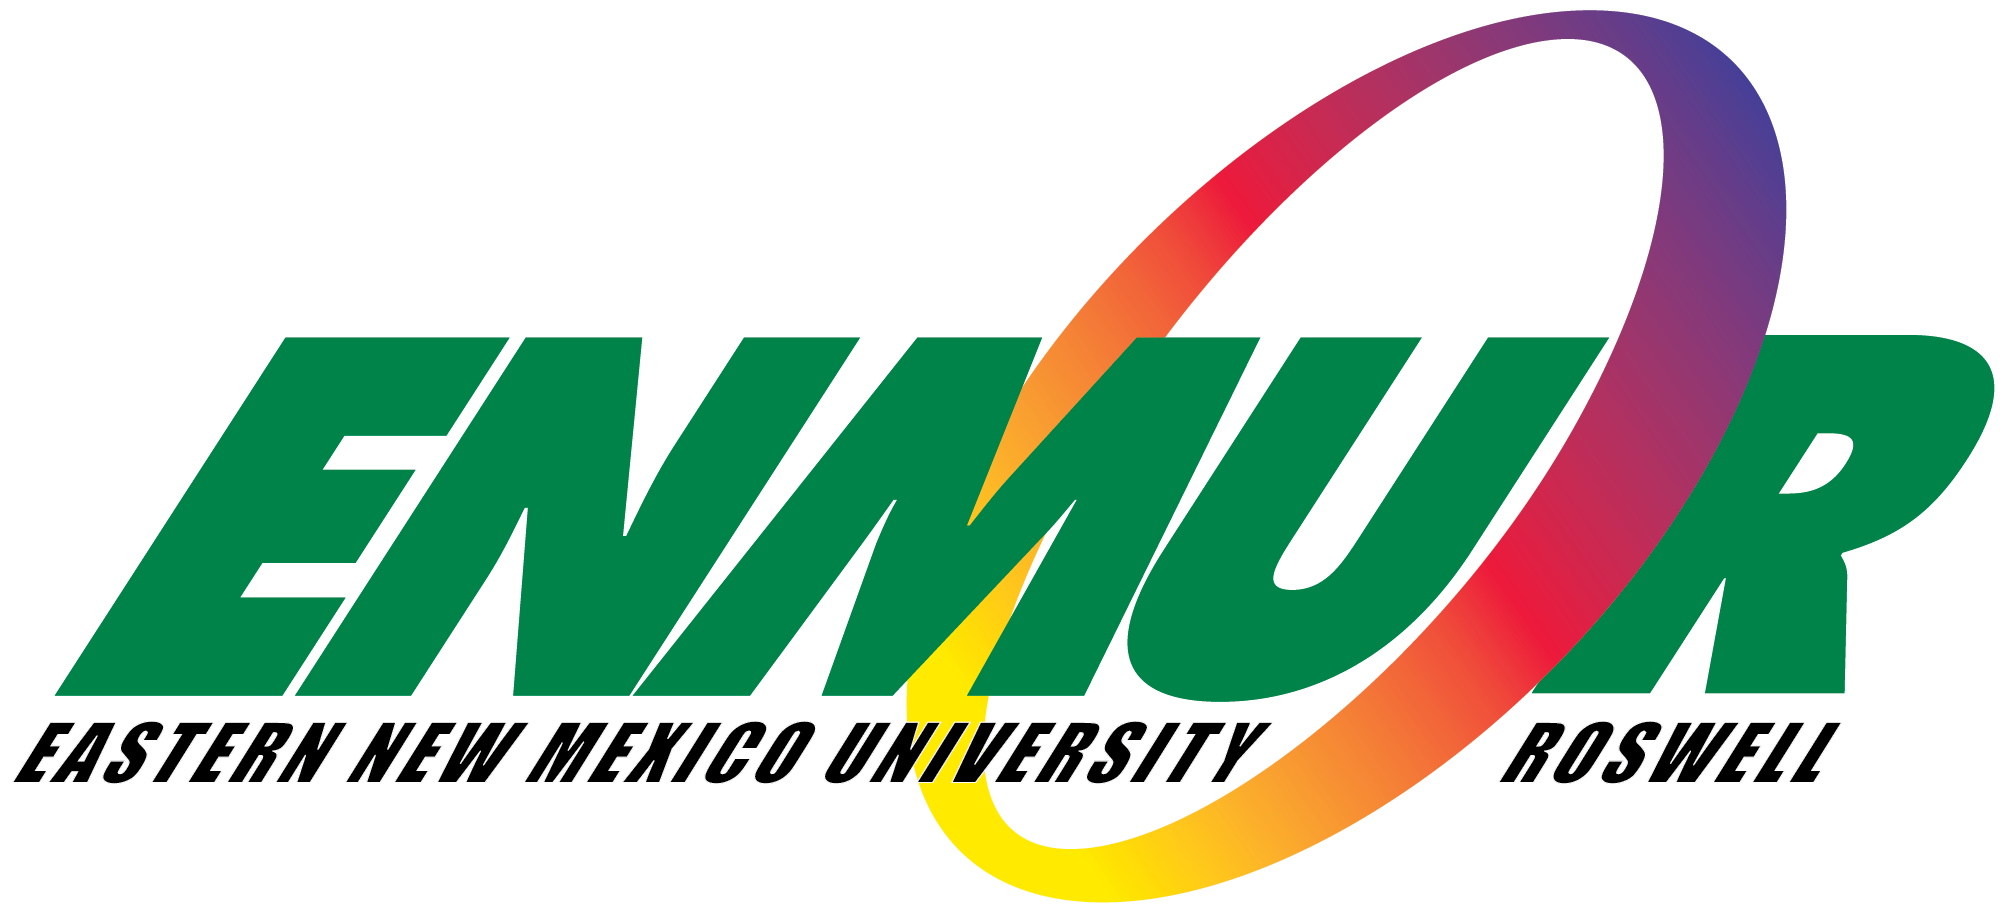 Eastern New Mexico University Roswell Logo